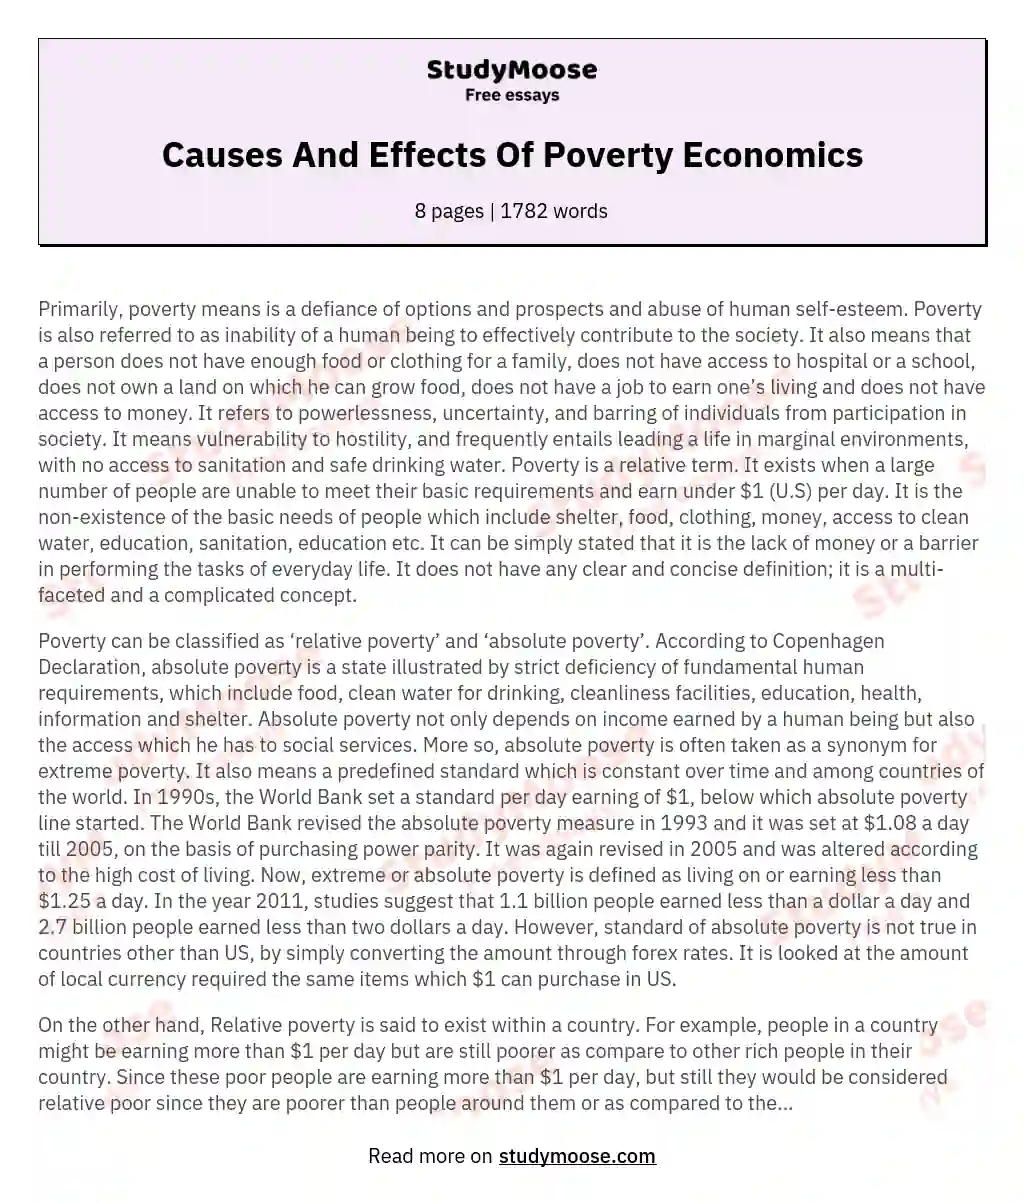 Causes And Effects Of Poverty Economics essay